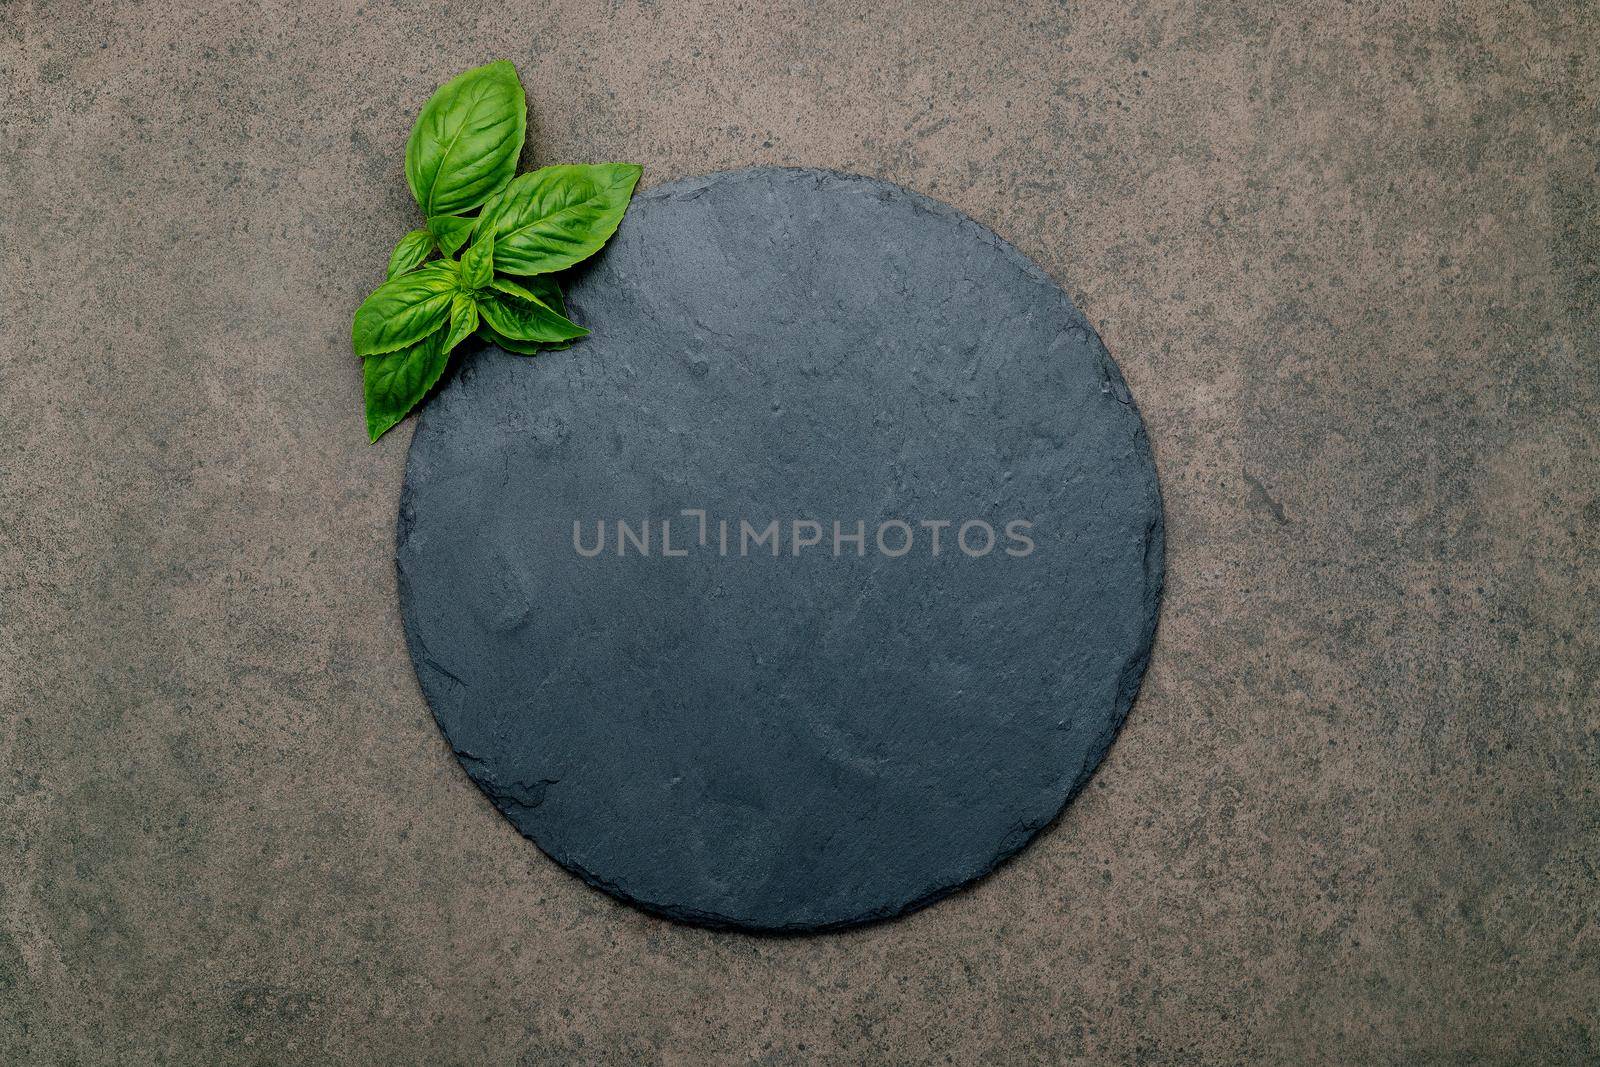 Empty pizza platter for homemade baking set up on dark concrete. Food recipe concept on dark stone background texture with copy space.  by kerdkanno